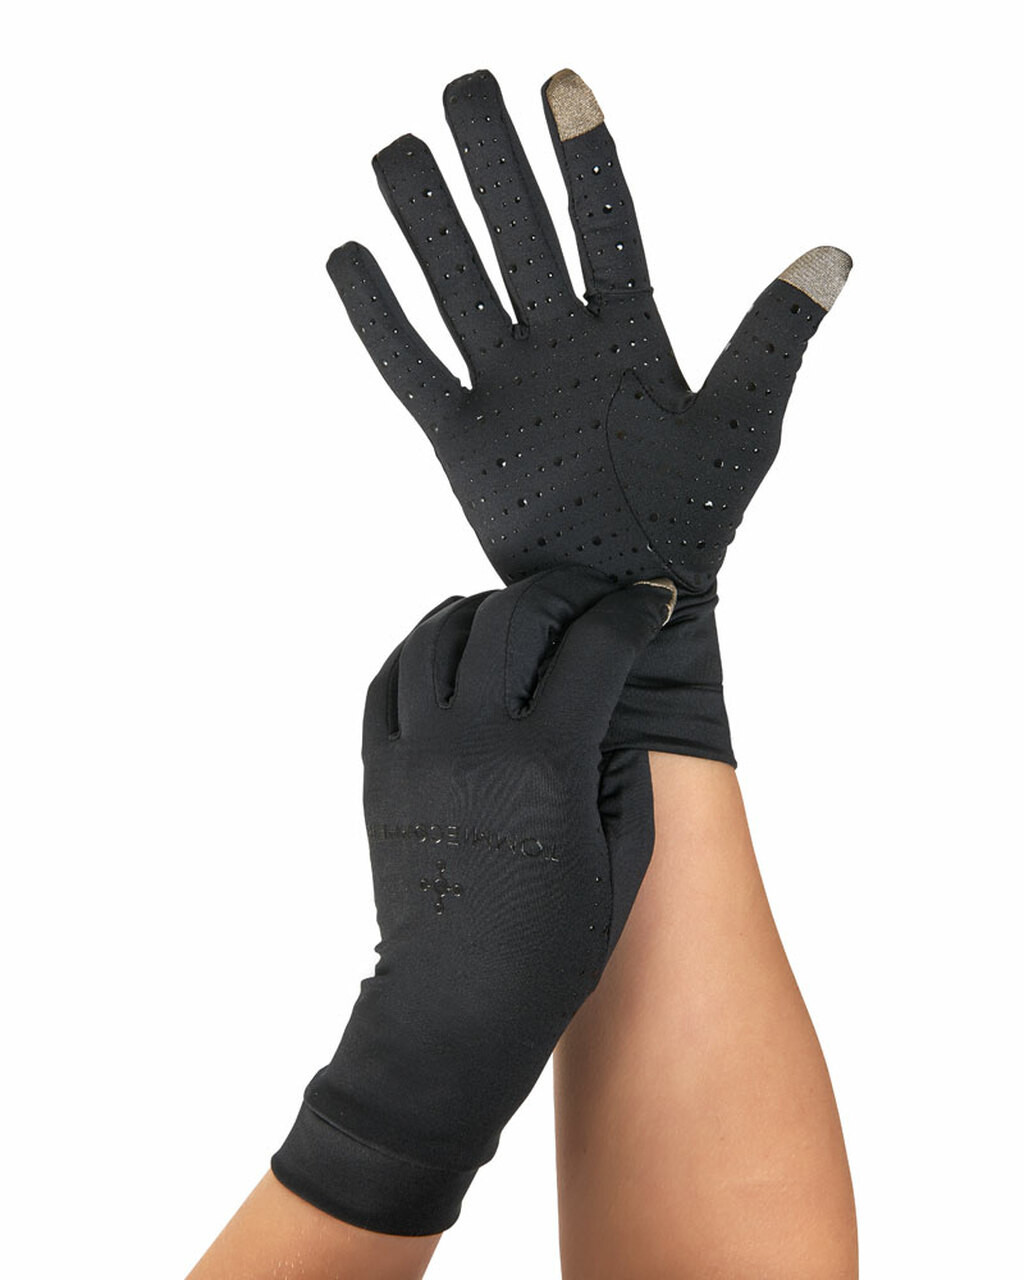  Tommie Copper Wrist Sleeves, Black, Small : Health